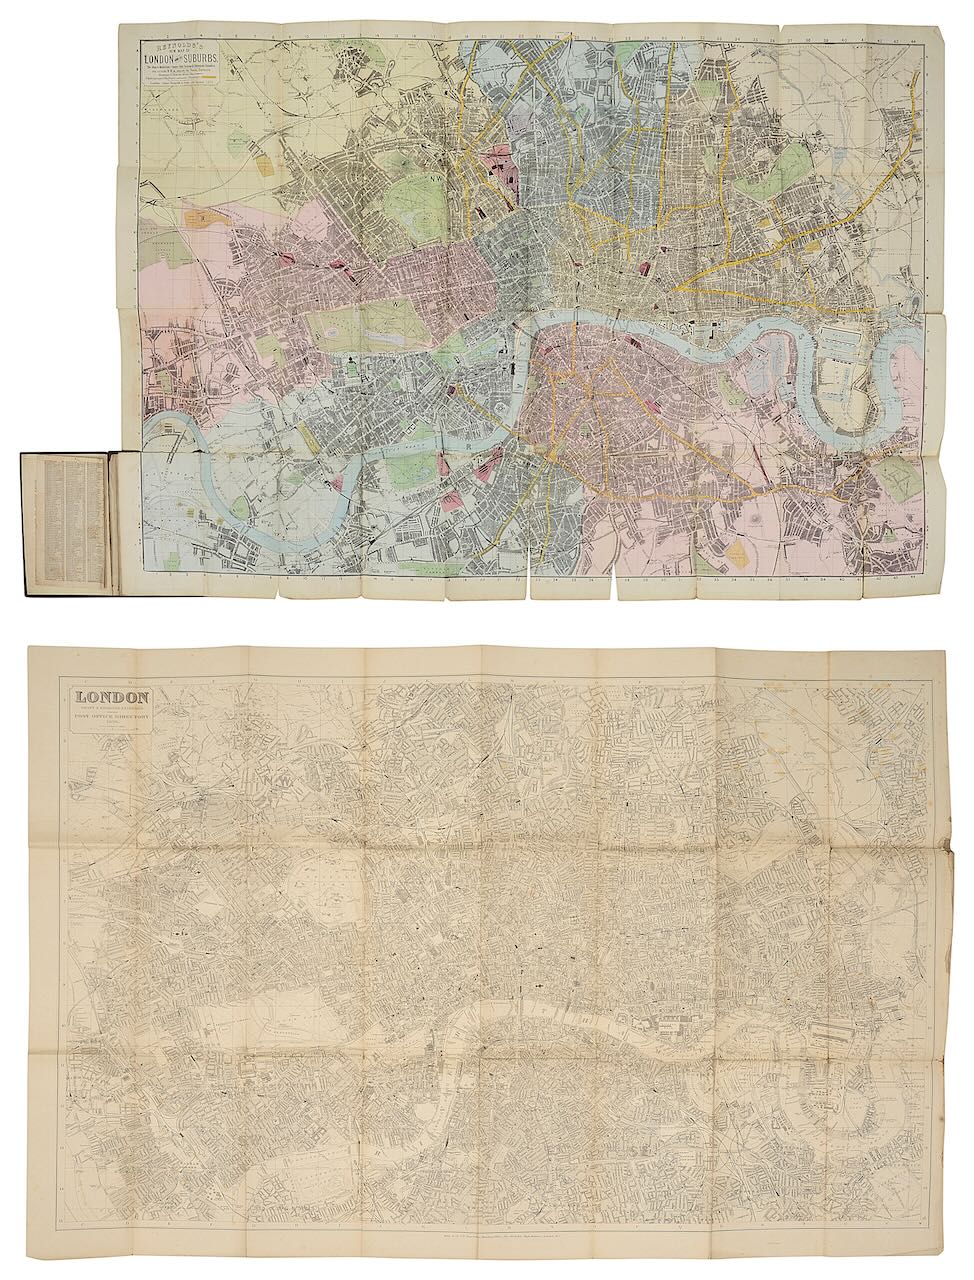 London. Reynolds' Large Coloured Map of London and another